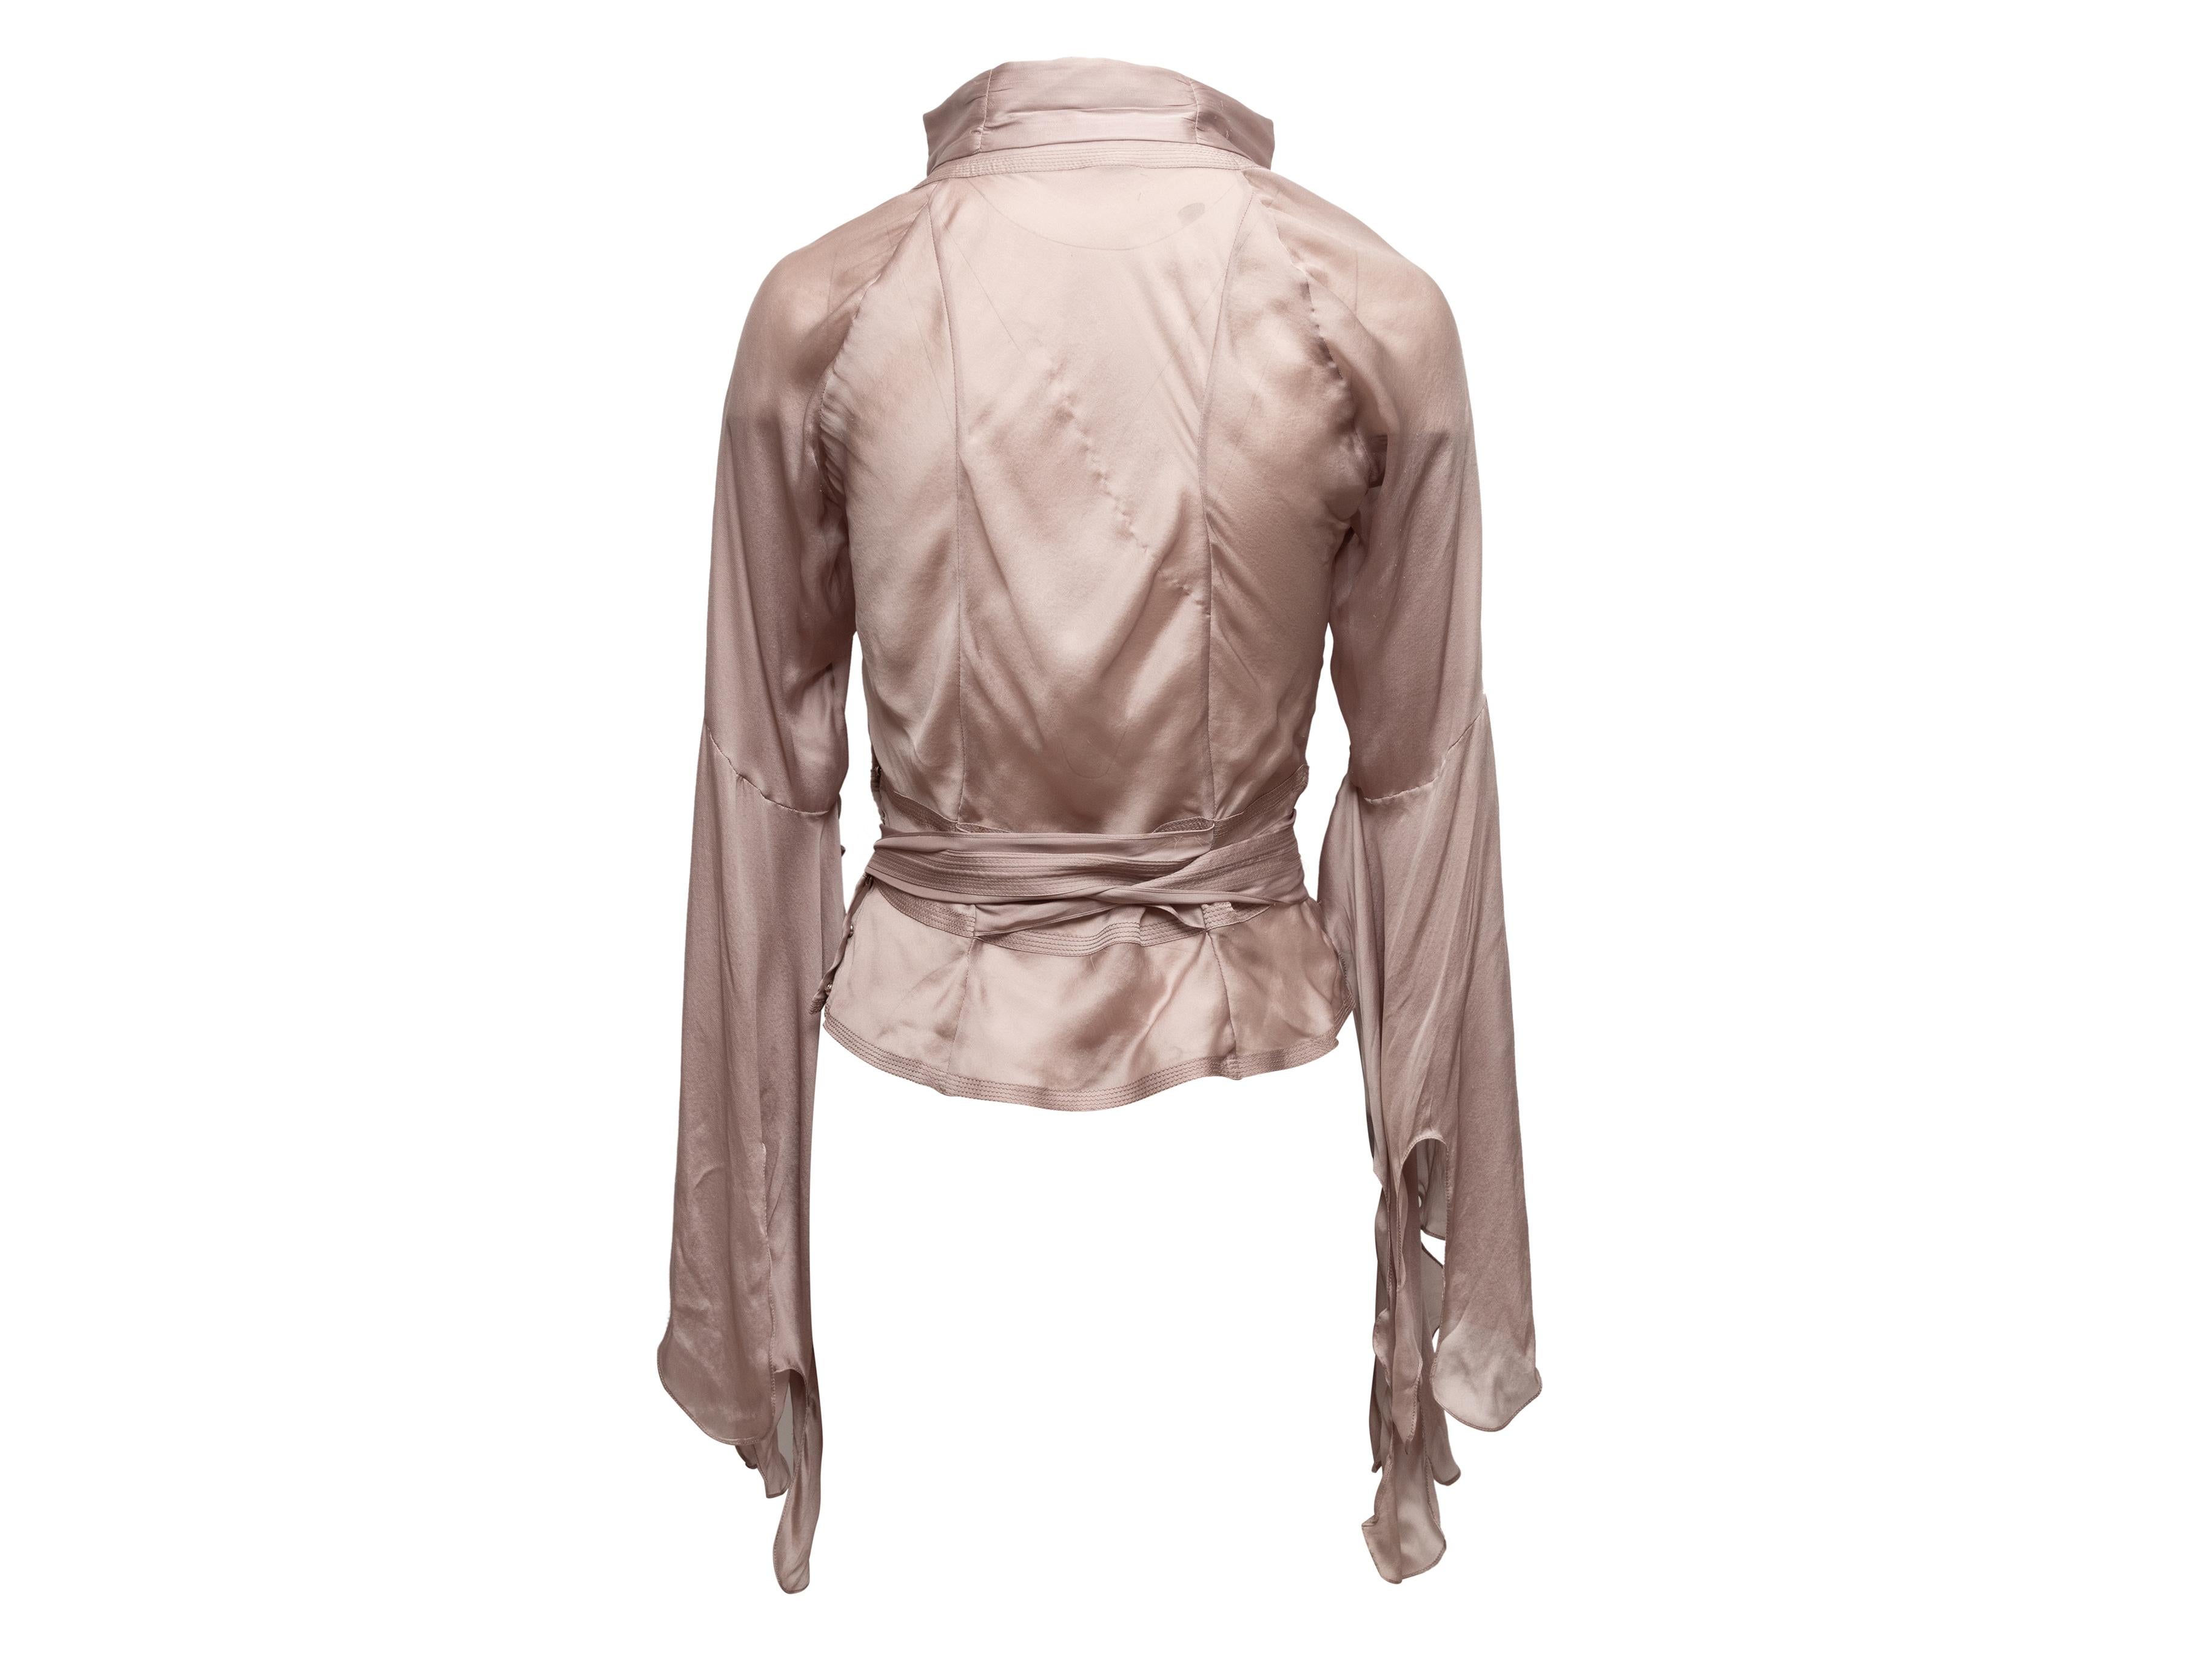 Product Details: Lavender silk blouse by Gucci. V-neck. Long bell sleeves. Sash tie at waist. 31